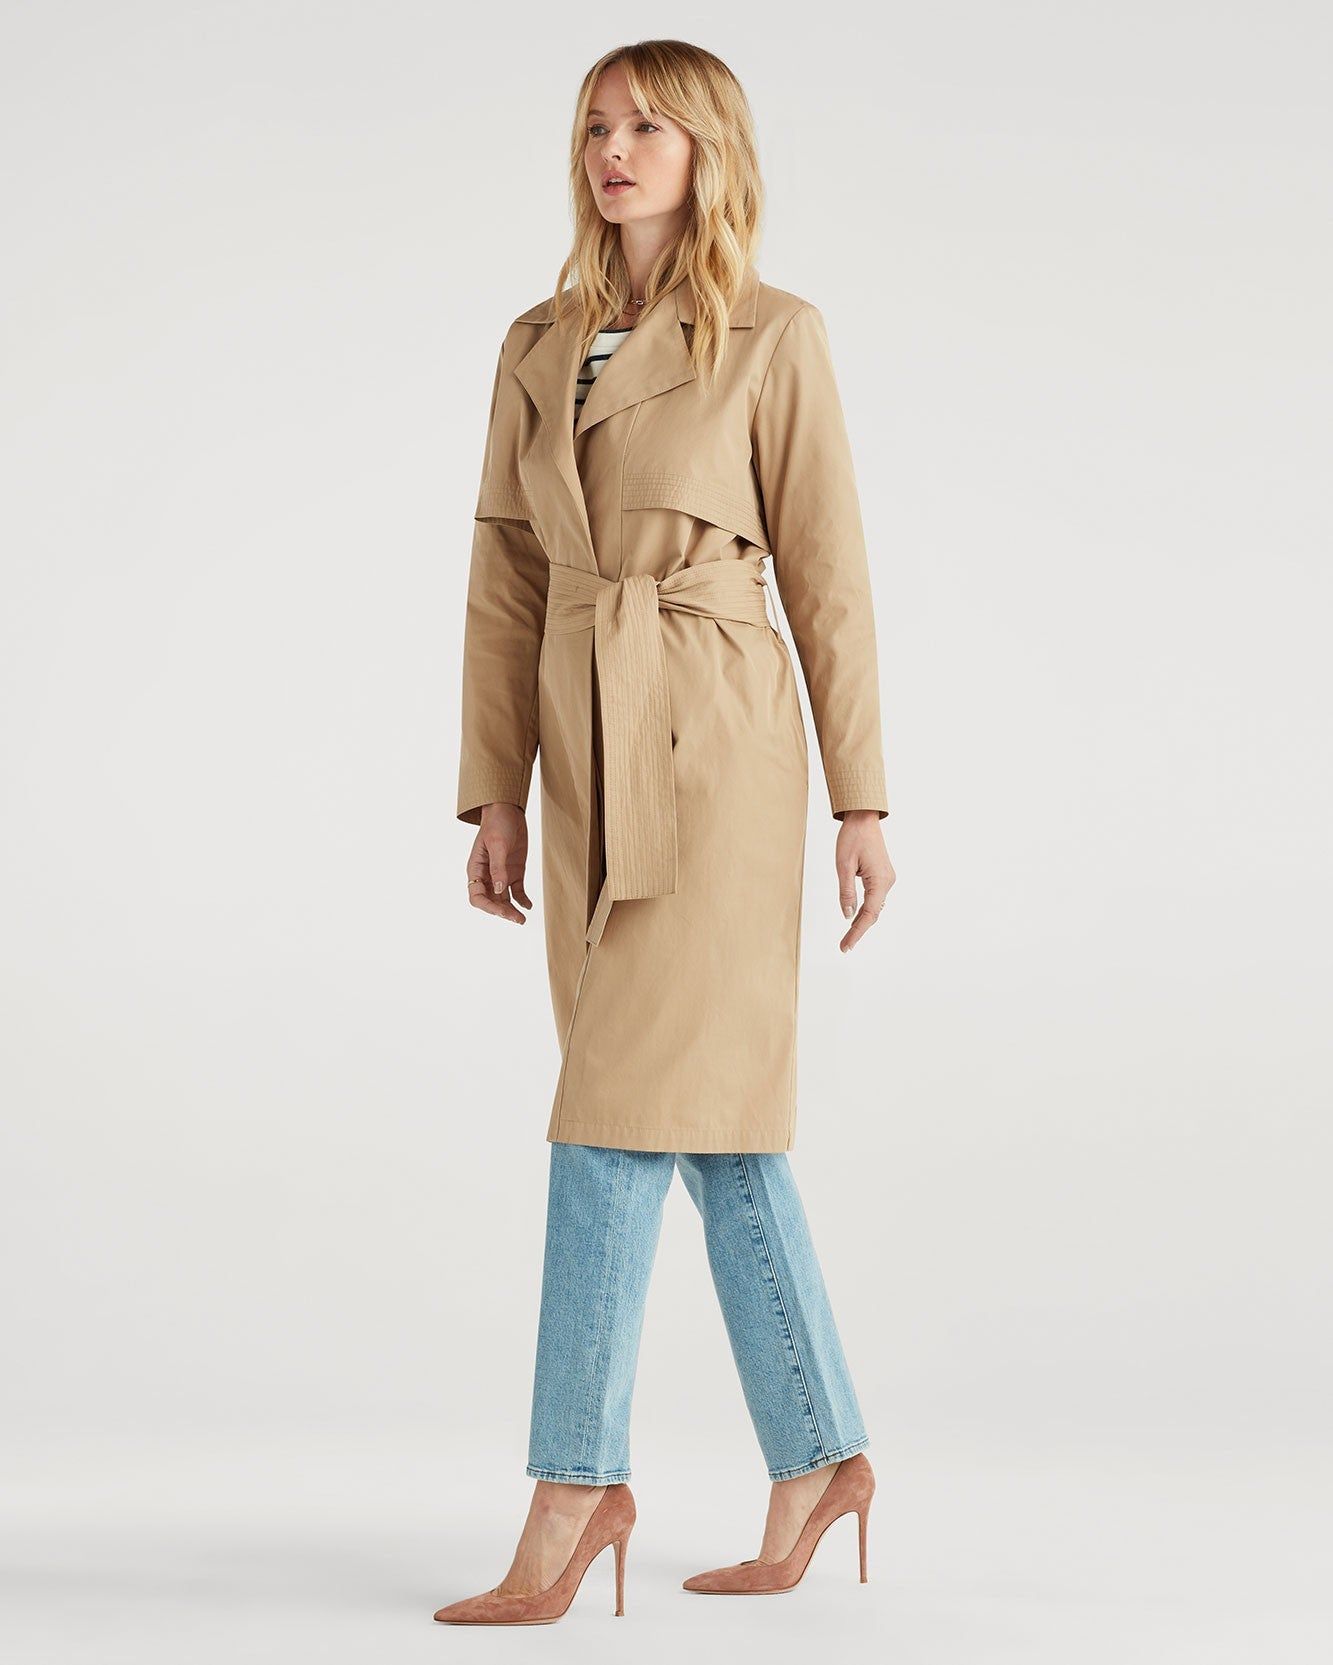 7 for all mankind camel coat